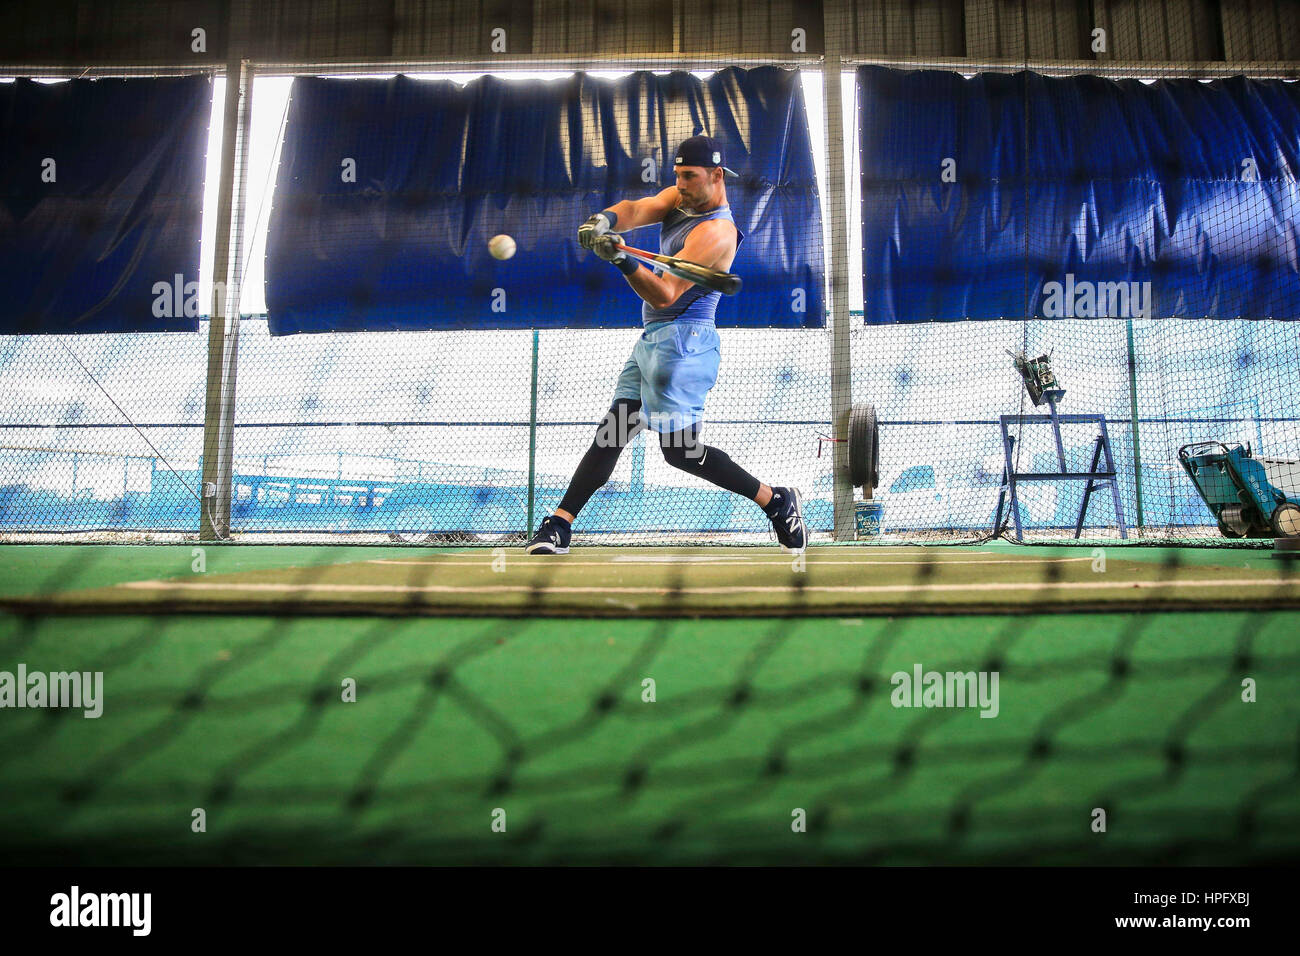 Port Charlotte, Florida, USA. 22nd Feb, 2017. WILL VRAGOVIC | Times.Tampa Bay Rays center fielder Kevin Kiermaier (39) takes cuts in the batting cage after wet weather cancelled on-field work at Charlotte Sports Park in Port Charlotte, Fla. on Wednesday, Feb. 22, 2017. Credit: Will Vragovic/Tampa Bay Times/ZUMA Wire/Alamy Live News Stock Photo